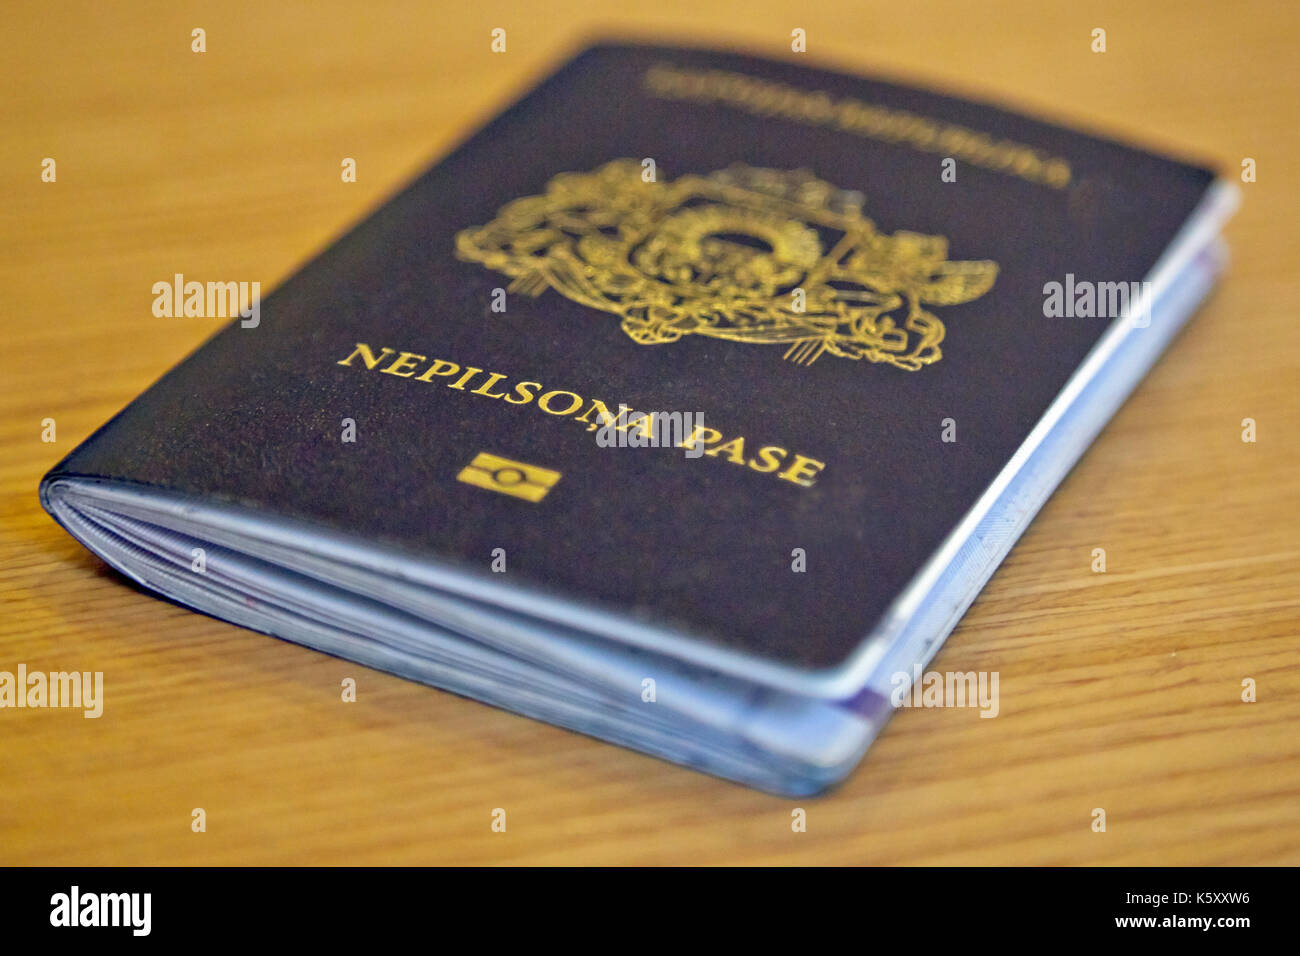 ARCHIVE - A passport for non-citizens, photograpged in Latvia, 8 November 2016. There are some 242,000 non-citizens in Latvia according to the country's interior ministry. That makes up 11 percent of the 2 million inhabitants. They are mostly comprised of citizens of the former soviet union that stayed in Latvia after the collapse in 1991, as well as their progeny. They are granted a permanent residency, but enjoy less rights in comparison to actual citizens of the country. Photo: Alexander Welscher/dpa Stock Photo